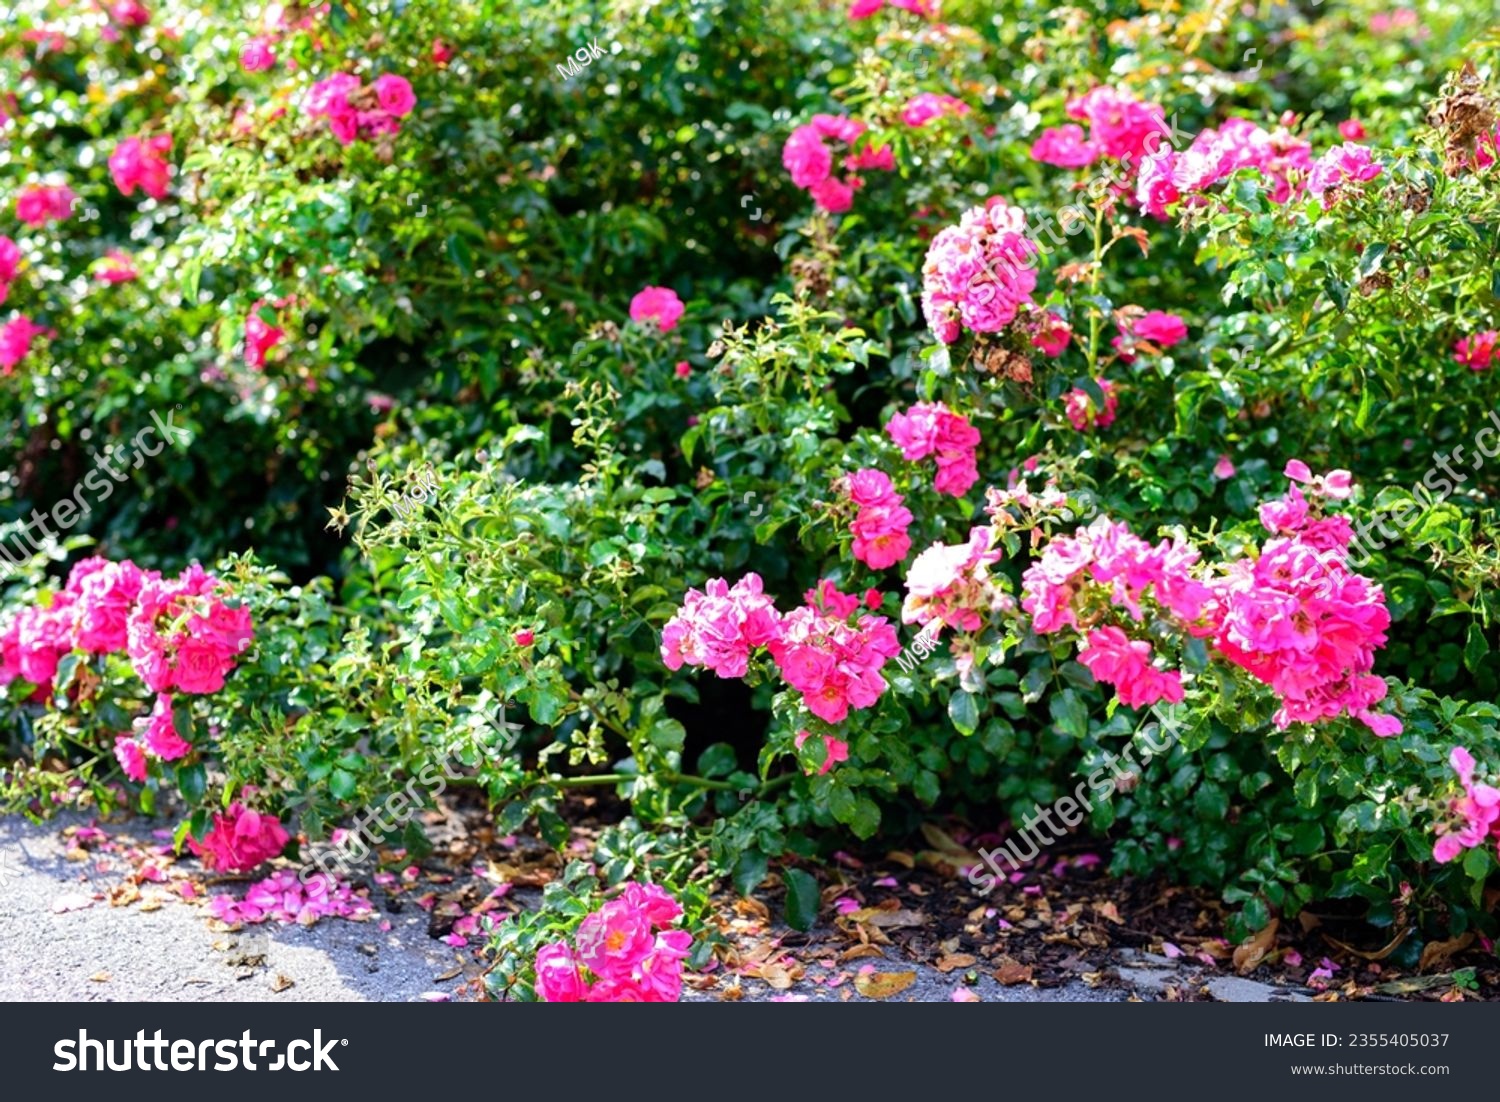 bushes full of pink roses on a sunny summer day. 'THE FAIRY' BUSHING rose. blooming rose bushes. Beautiful shrub roses. roses in the city park.  #2355405037